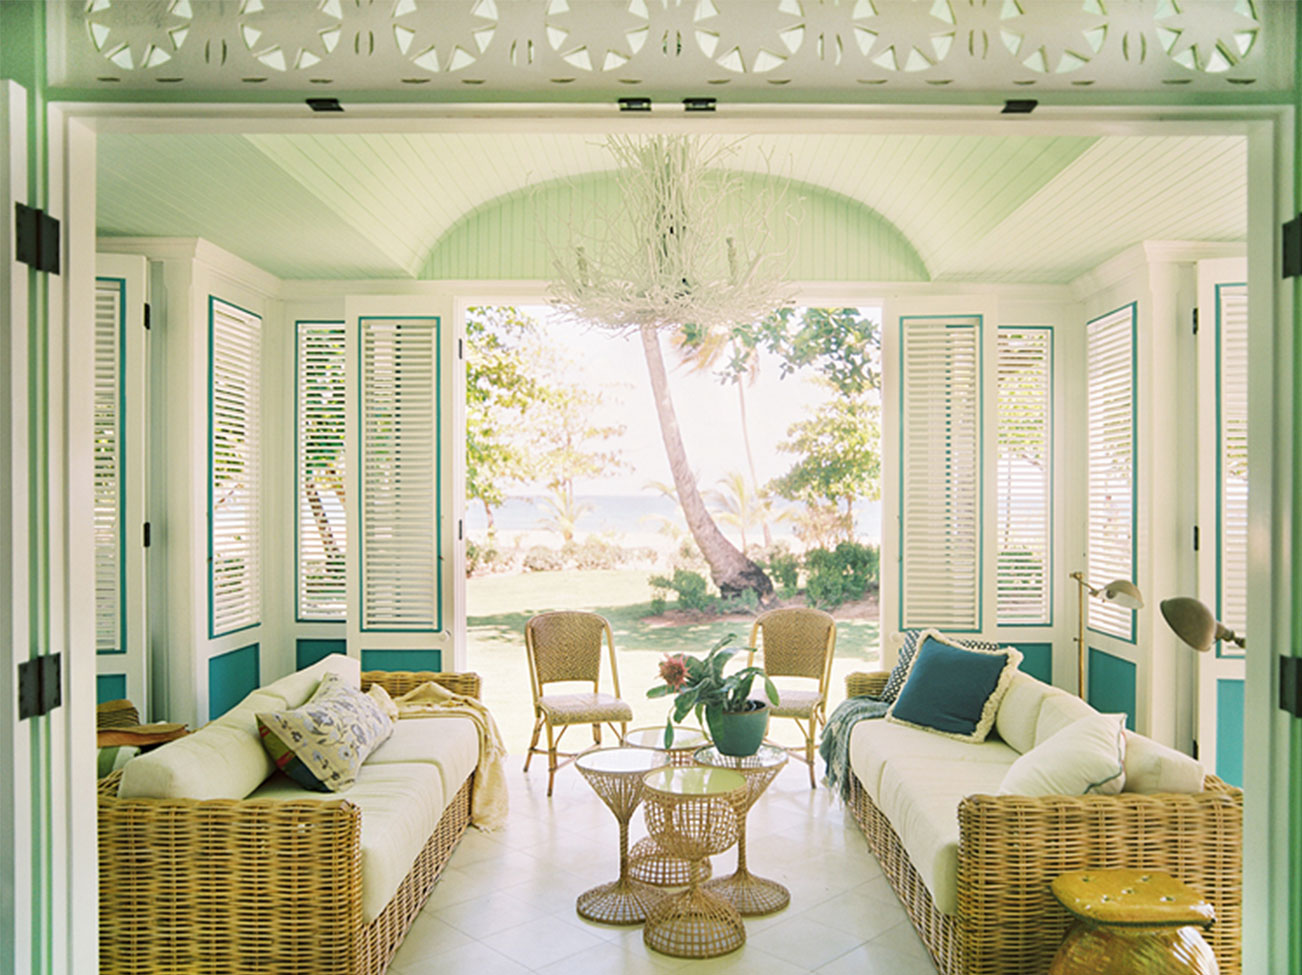 An island veranda in green and creamy white hues with hinged shutter panels, two woven wicker sofas and matching chairs.